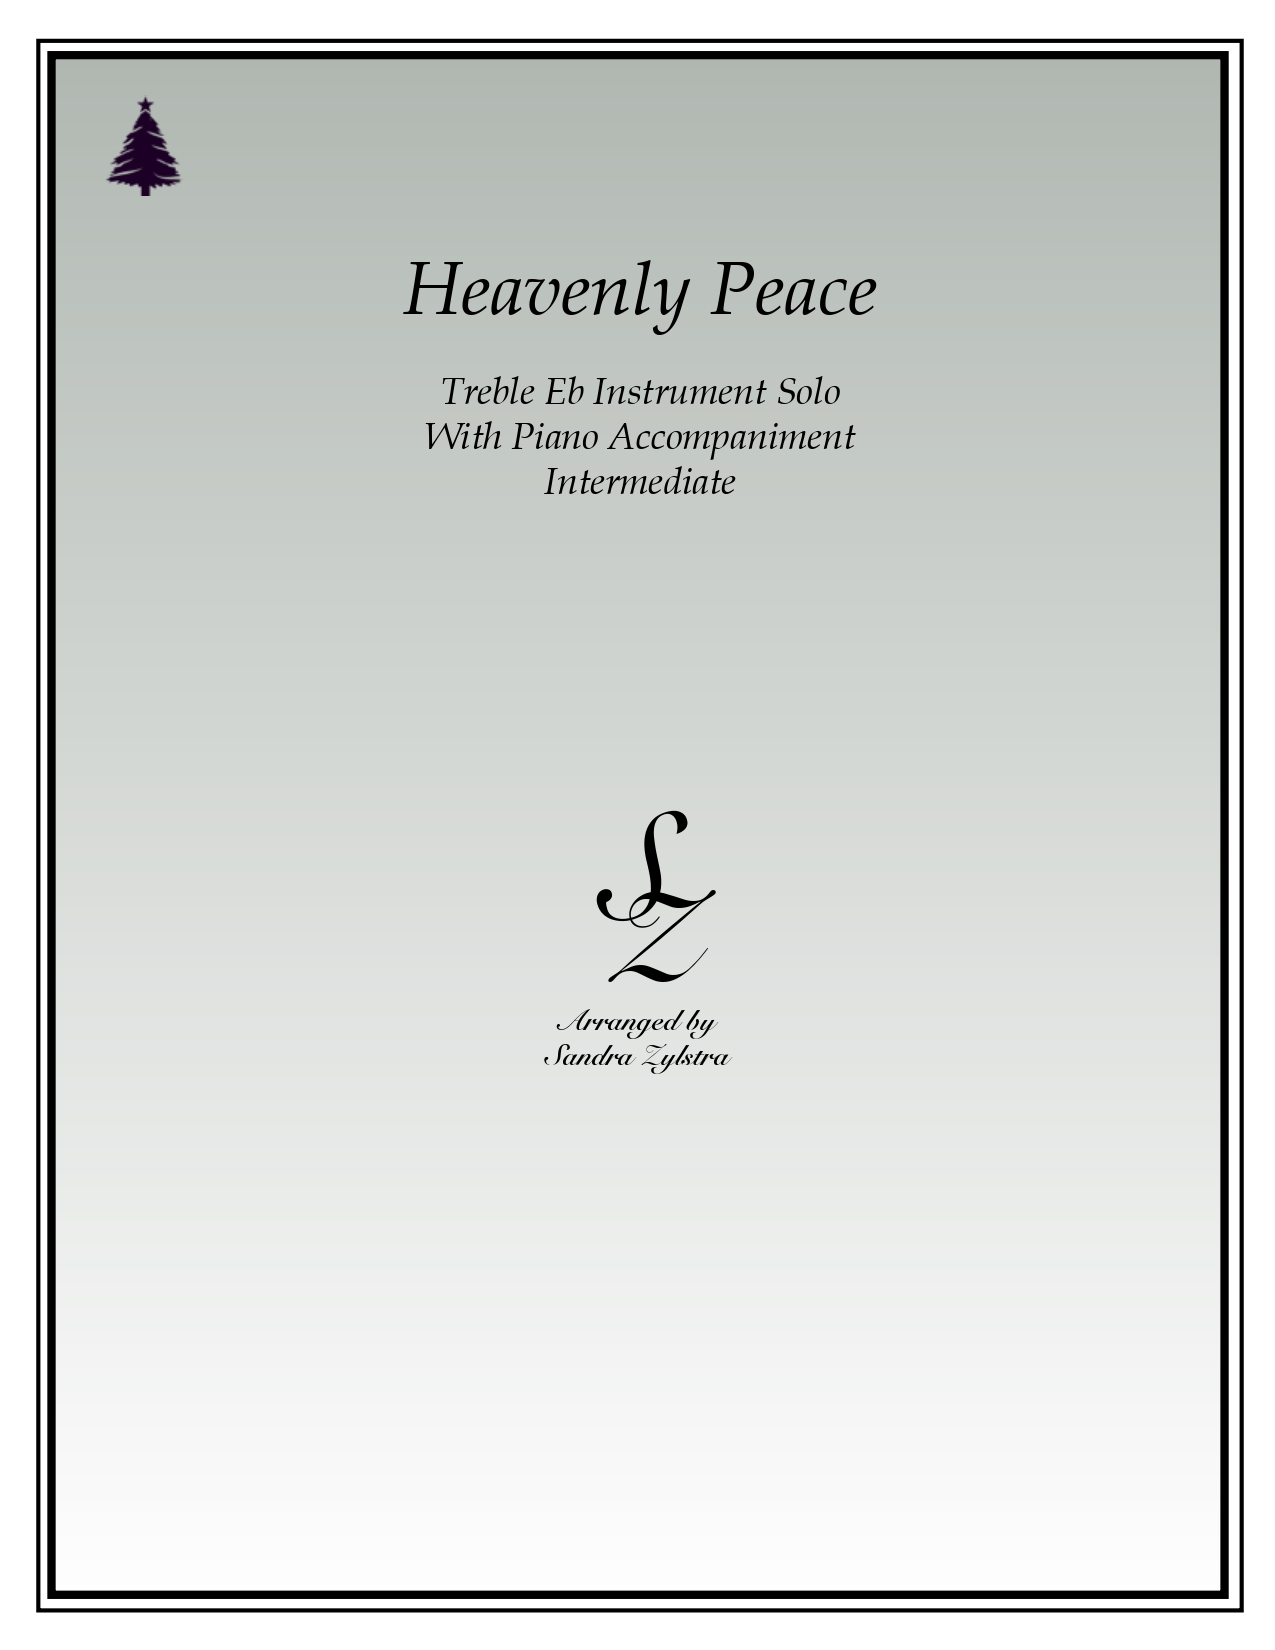 Heavenly Peace Eb instrument solo part cover page 00011